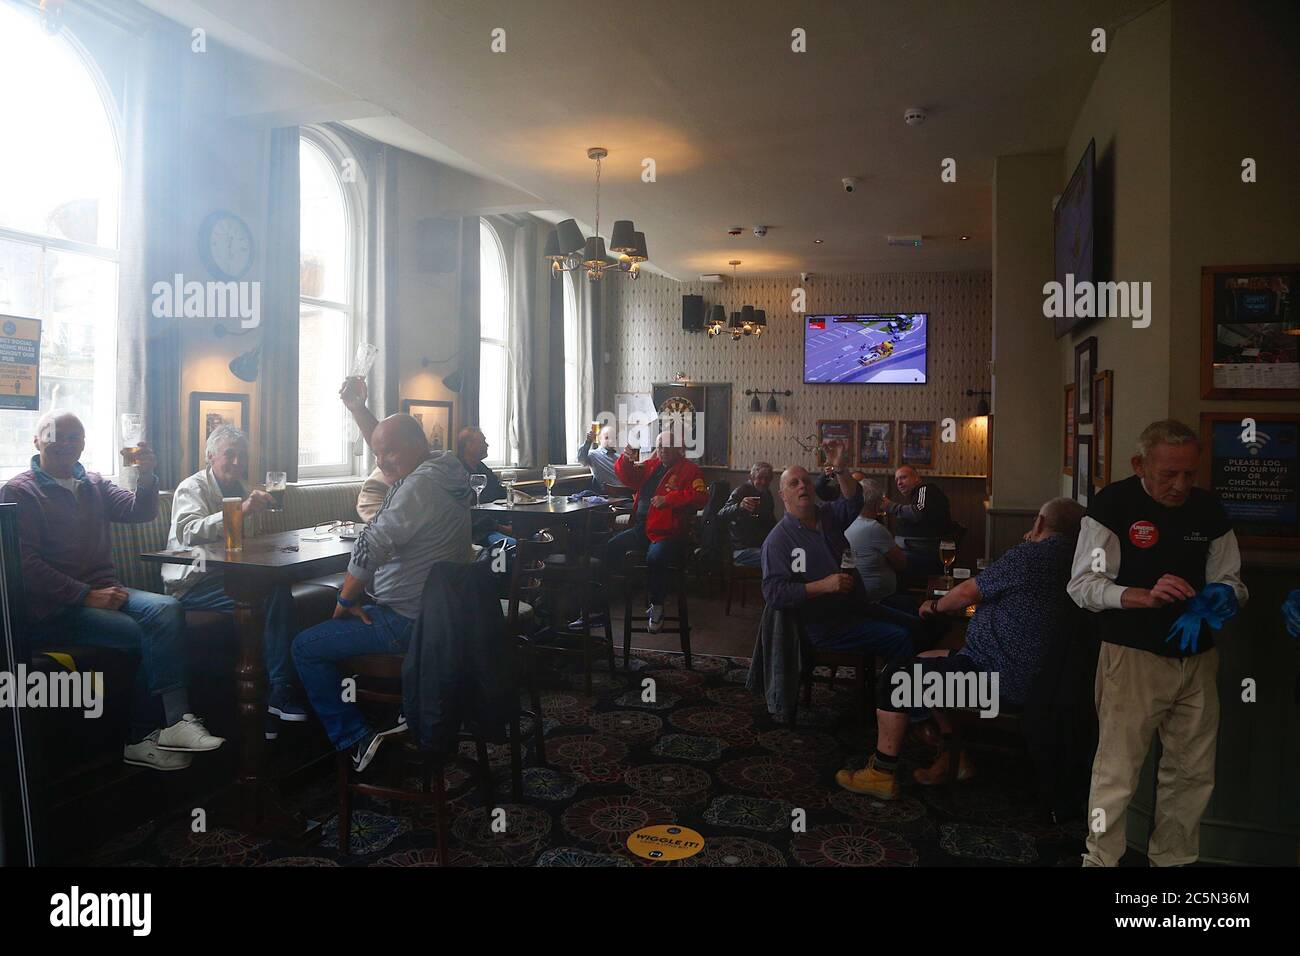 Hastings, East Sussex, UK. 04 Jul, 2020. Coronavirus update: With the government relaxing the rules further, bars, pubs, restaurants and barbershops are allowed to open. The busy Clarence pub in Hastings as. Patrons cheer the opening of pubs in England. Photo Credit: Paul Lawrenson-PAL Media/Alamy Live News Stock Photo